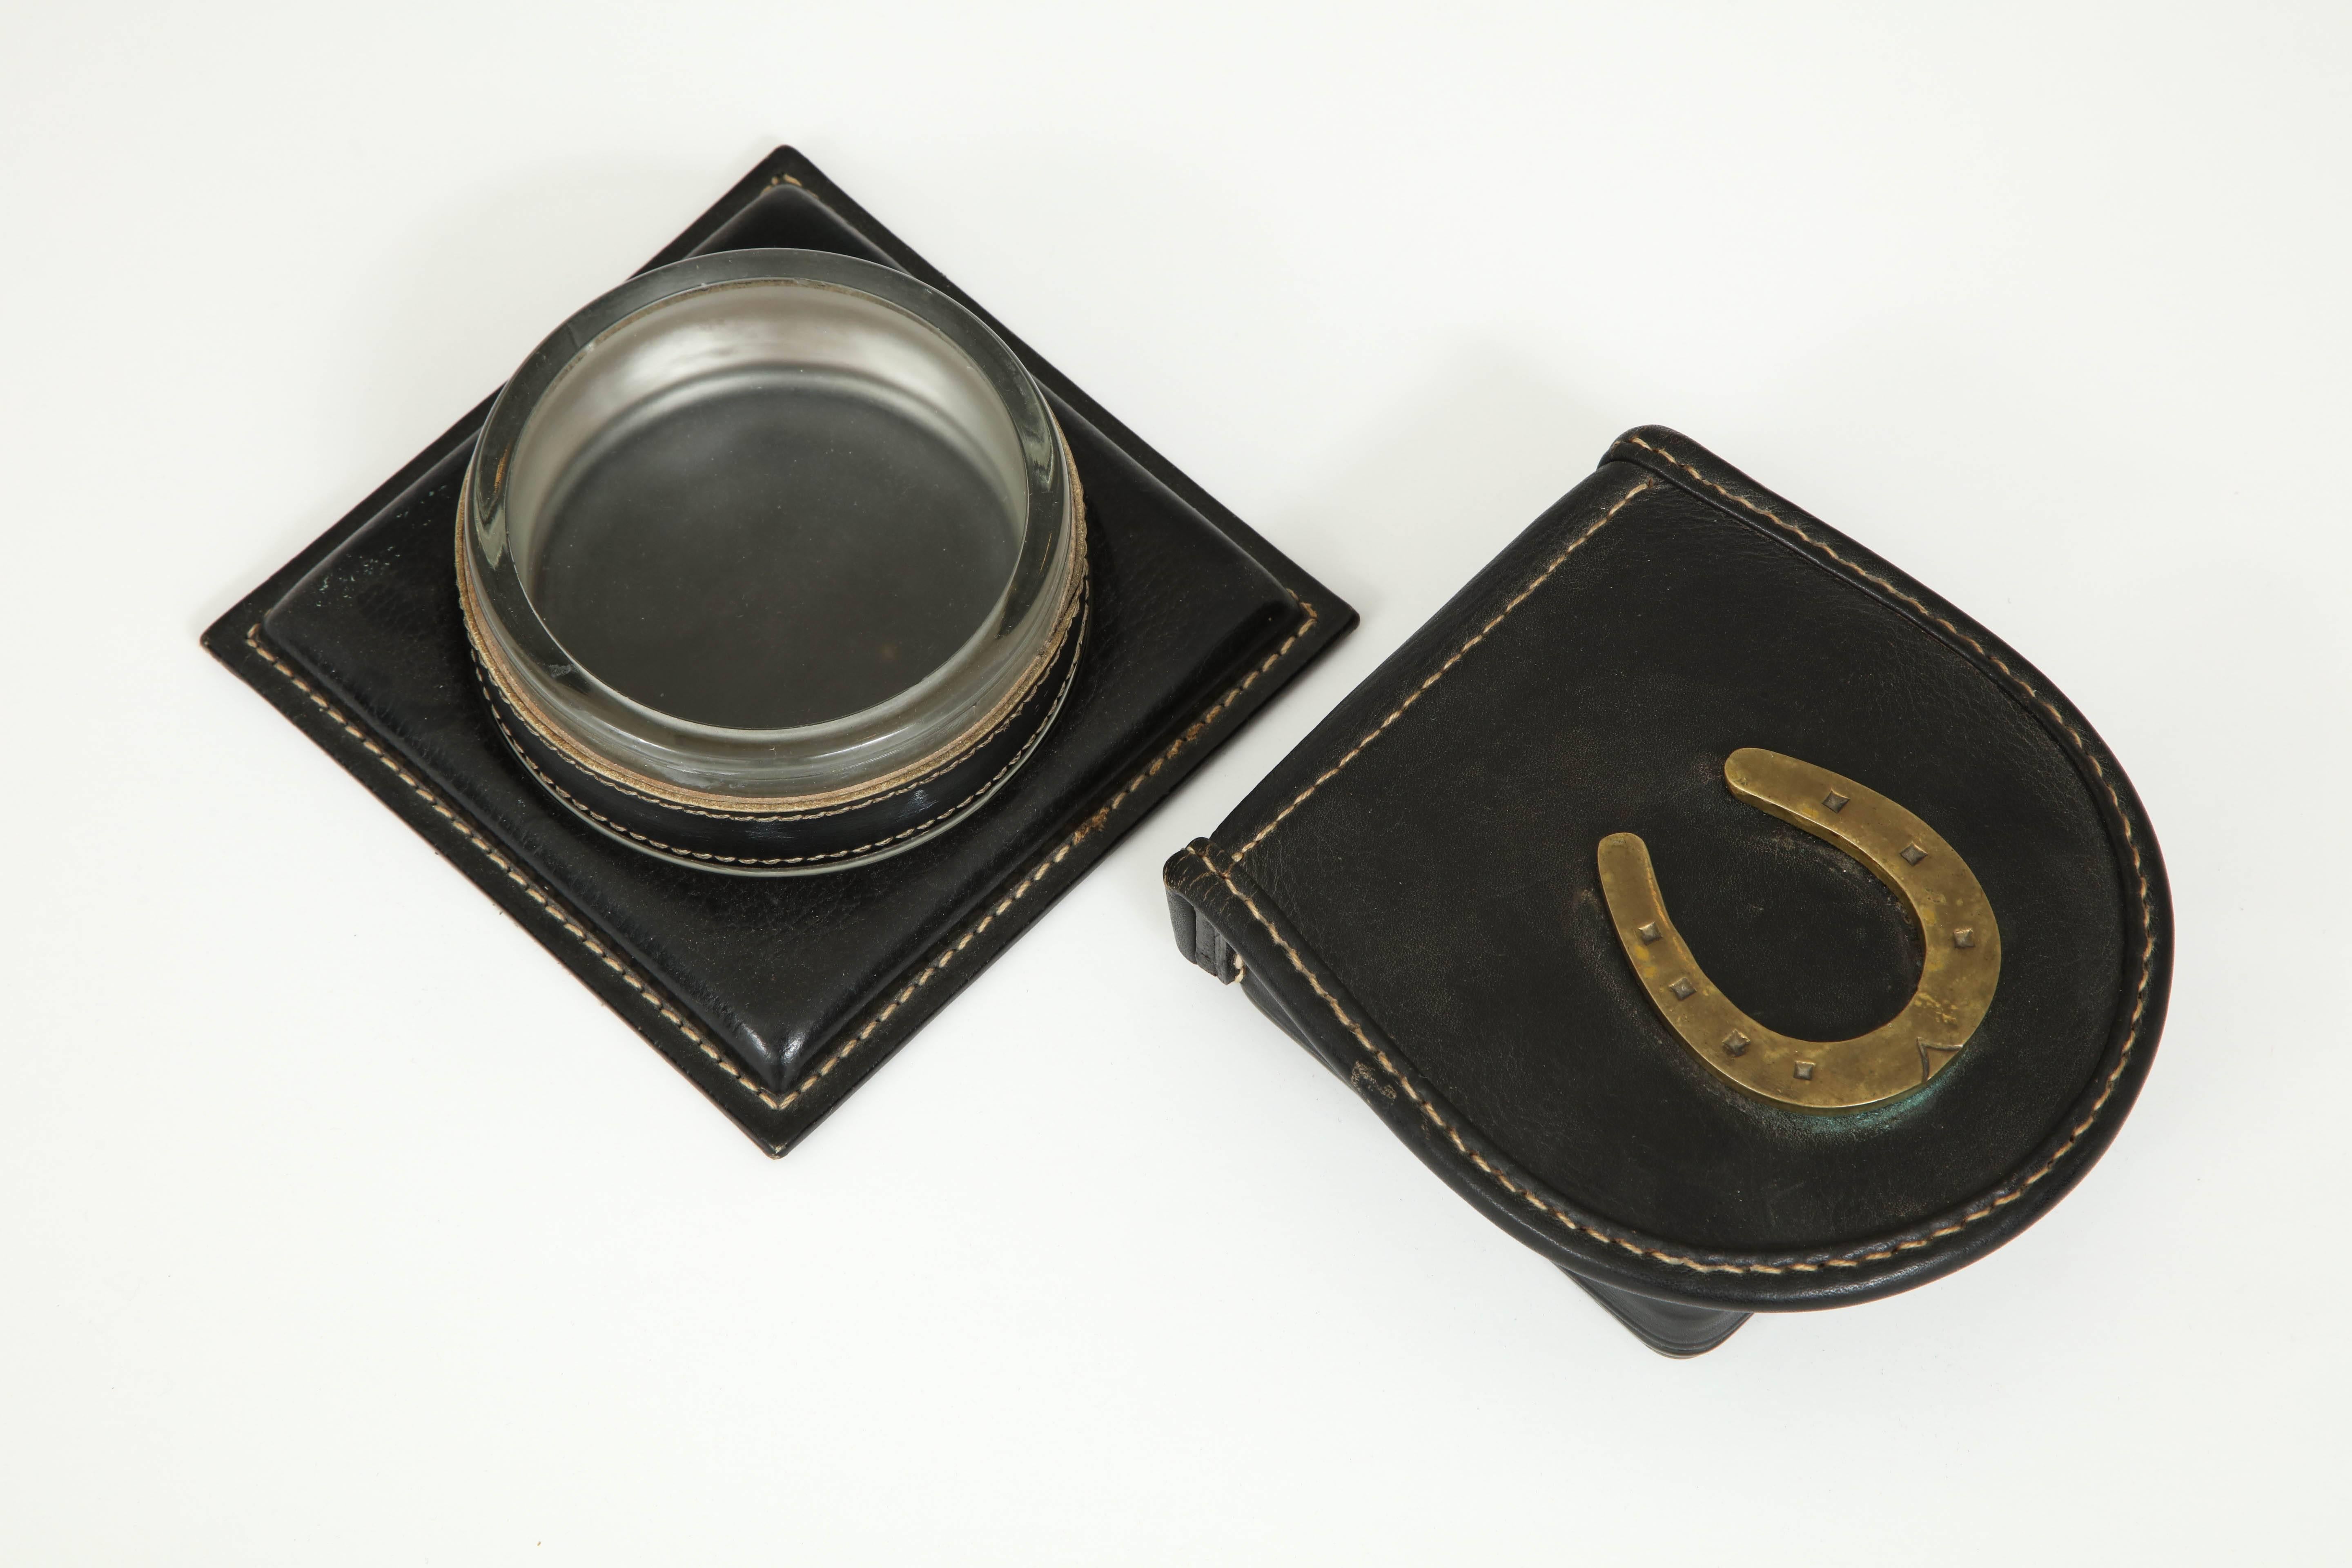 A catchall and a lidded box by Jacques Adnet, glass, brass and stitched leather.
Sold as a set or separately (divide price by two).